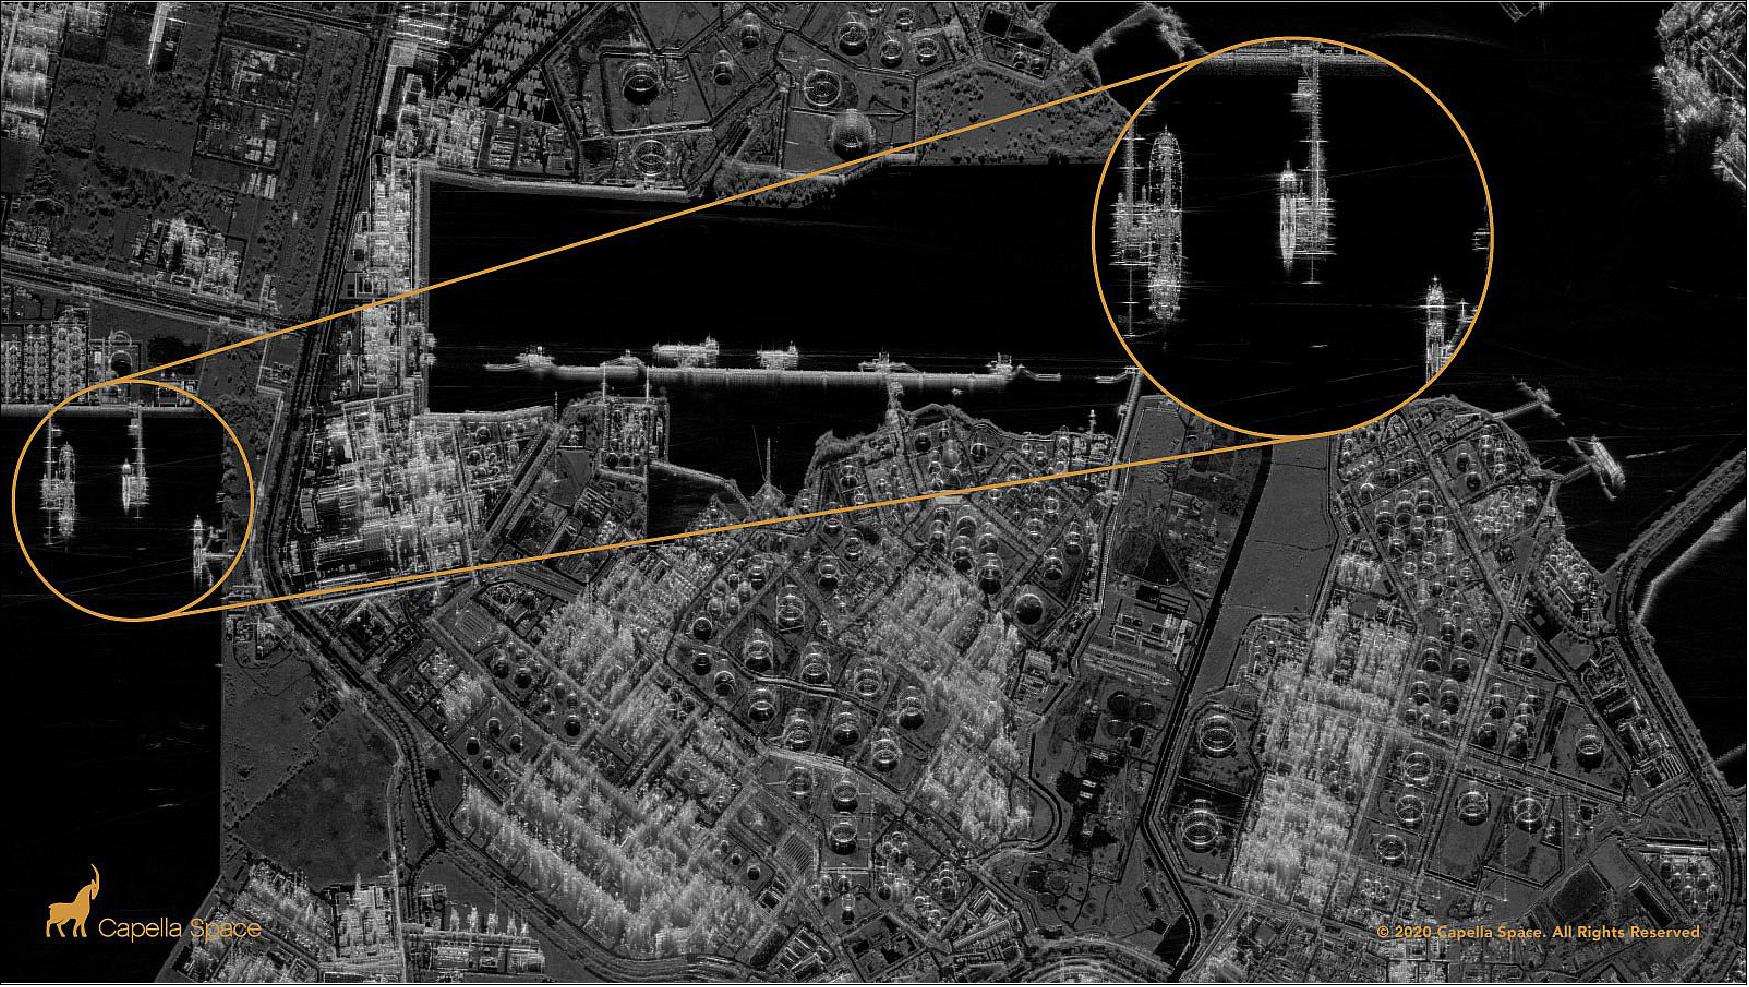 Figure 18: The metallic refining units and piping brightly reflect radar signals at ExxonMobil’s Singapore Chemical plant on Jurong Island. Very high resolution zoomed in views show the granular features of an oil tanker docked near floating roof storage tanks (image credit: Capella Space)